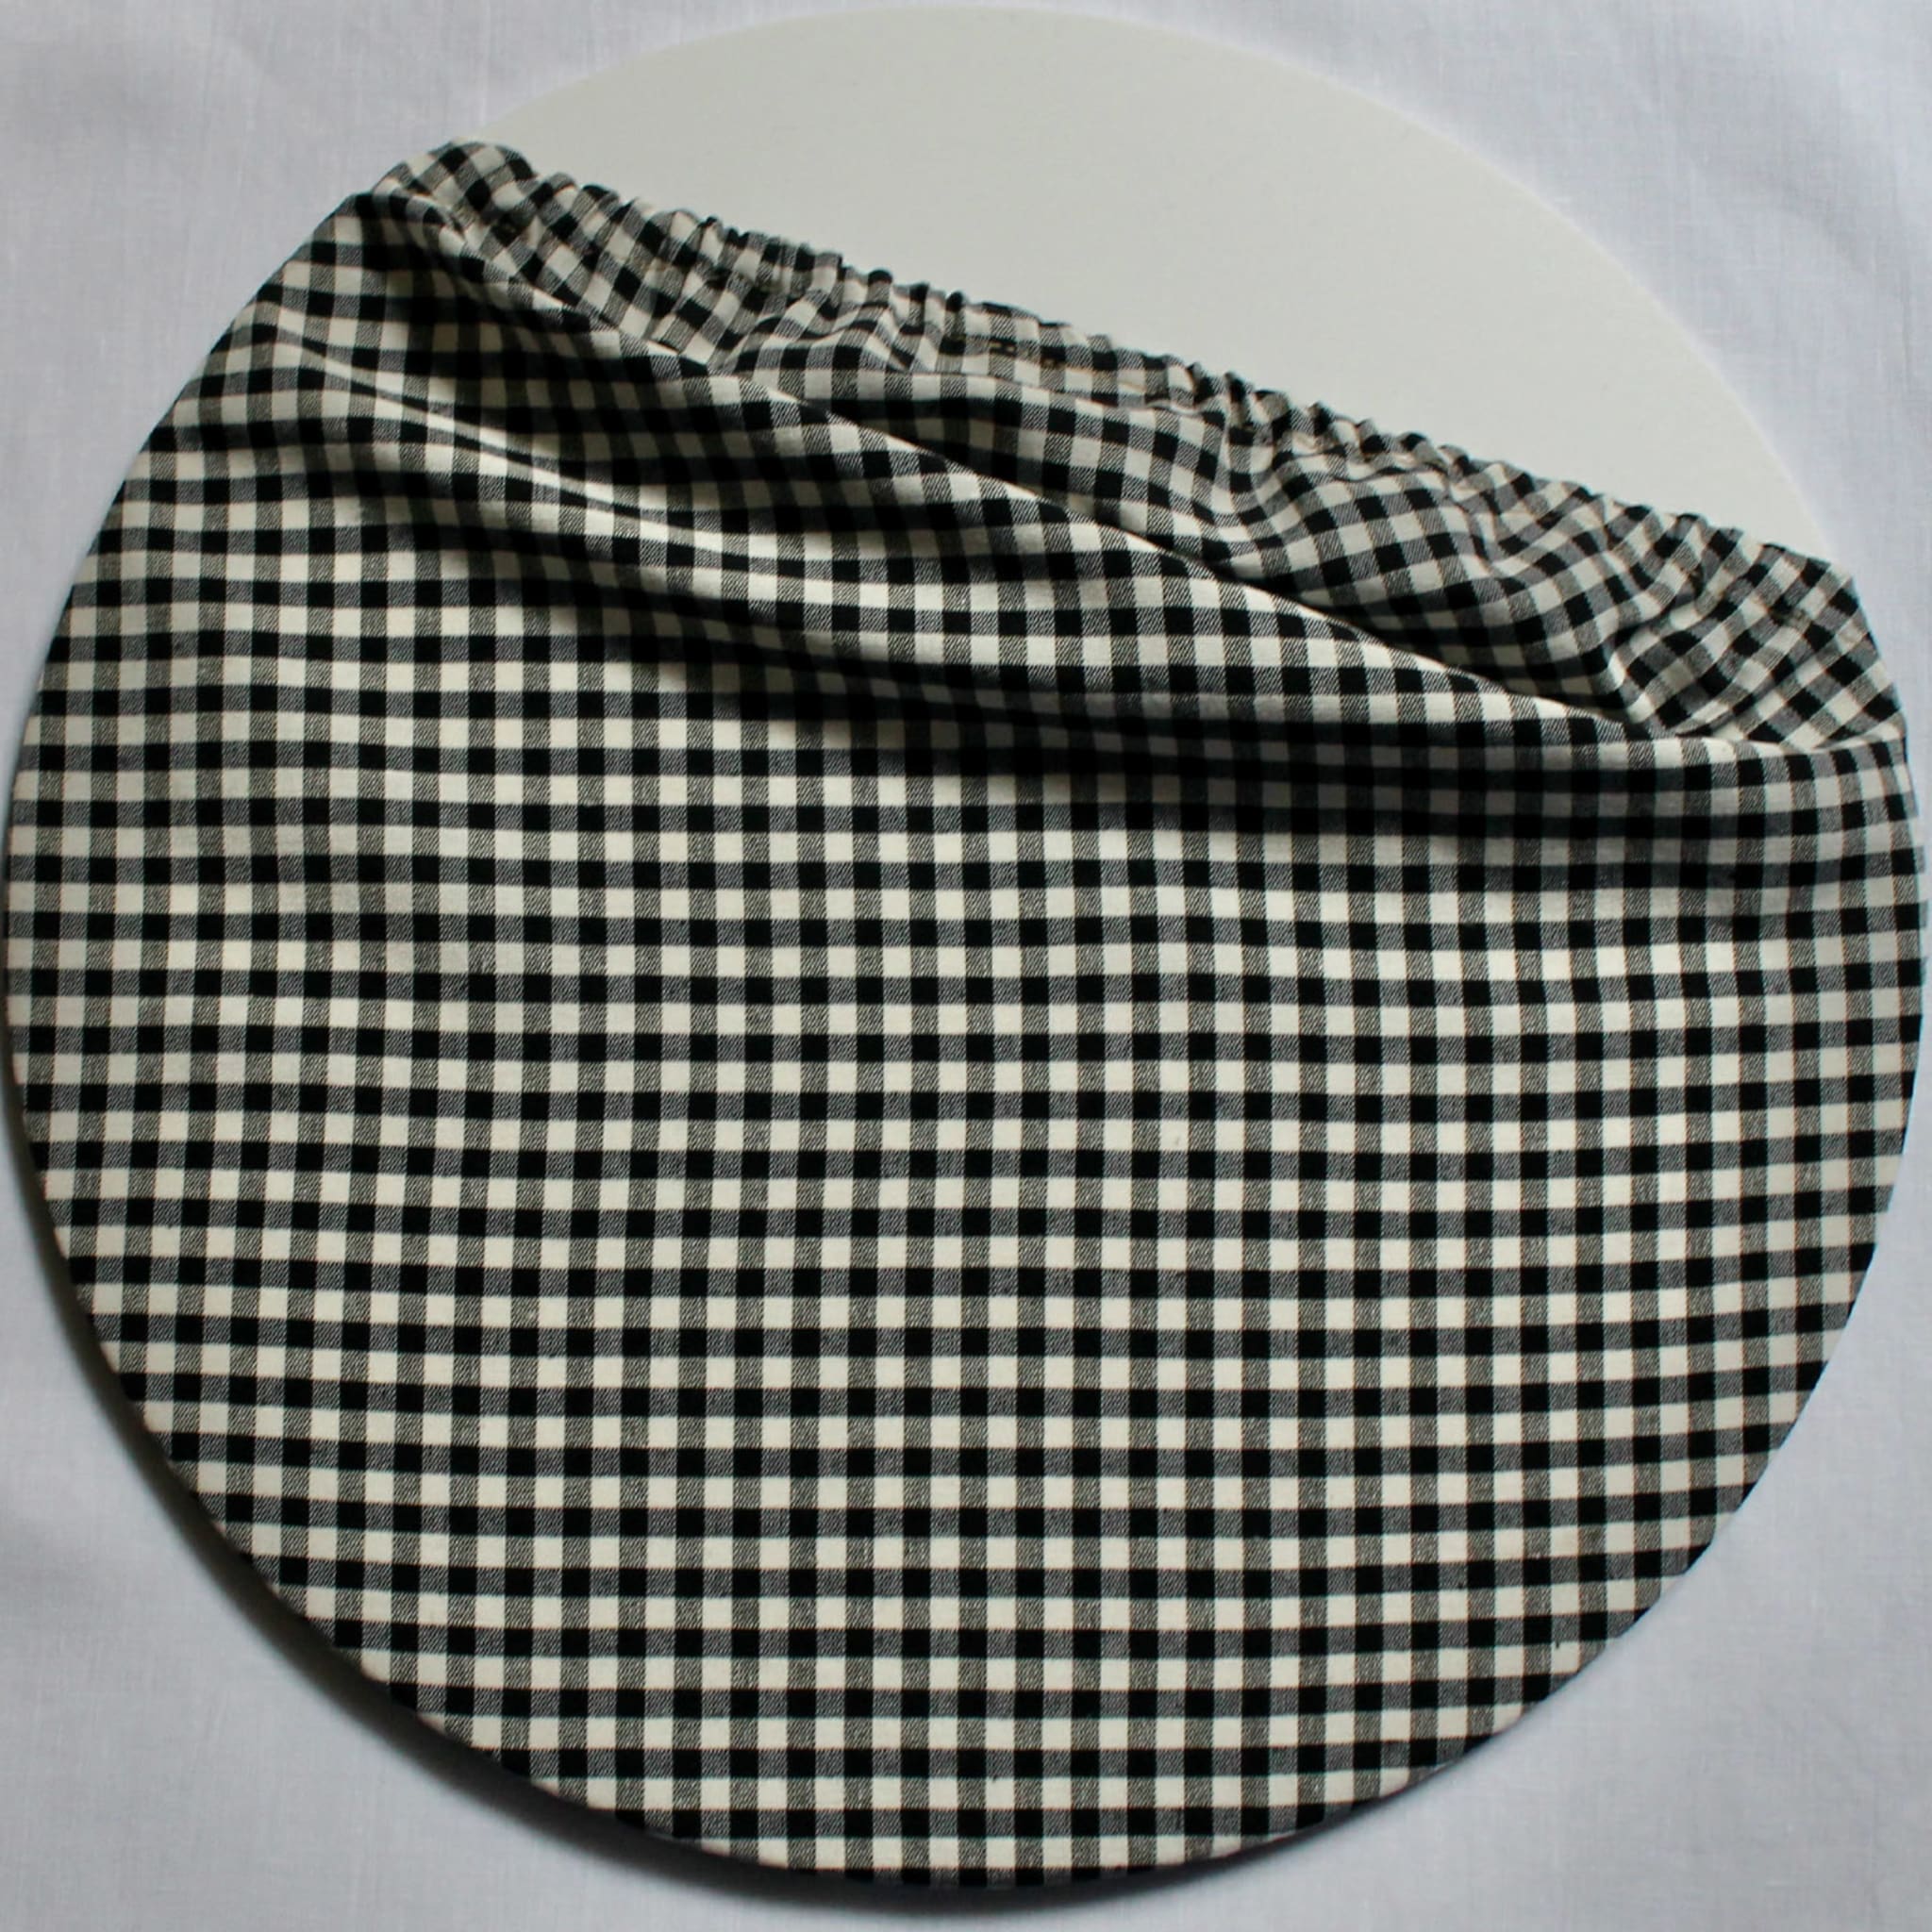 Cuffiette Black and White Placemat - Alternative view 1